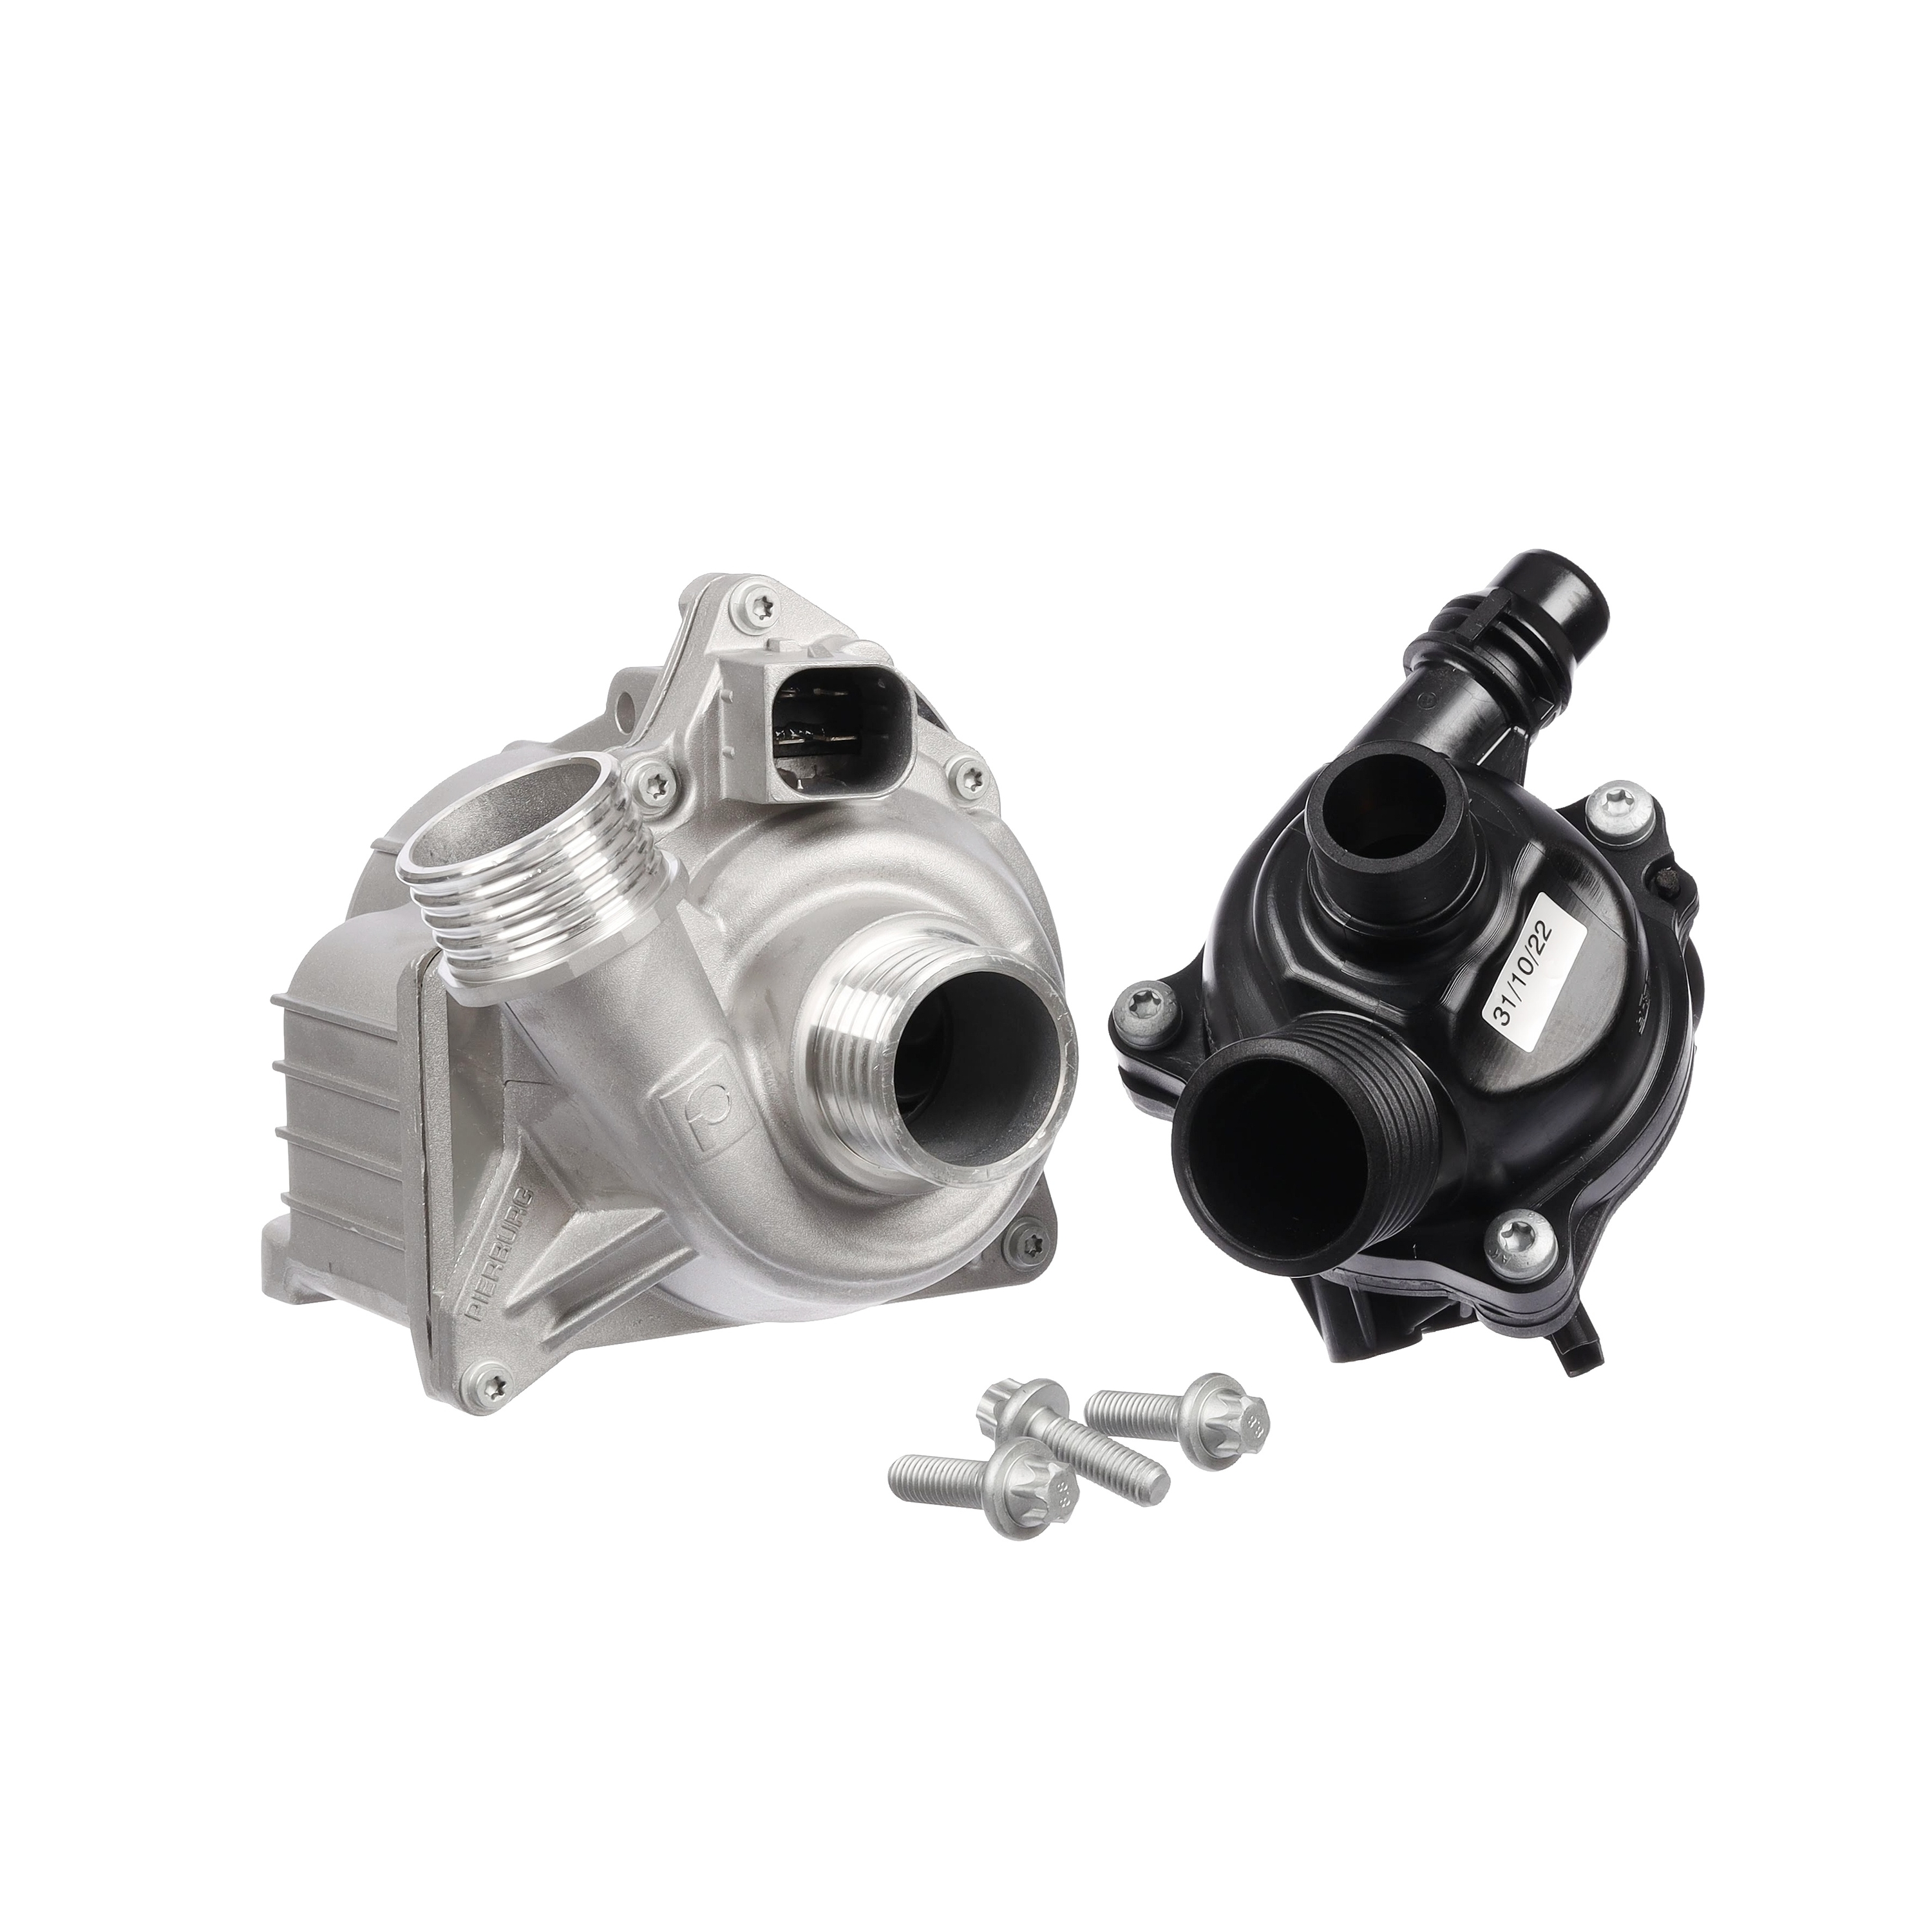 ET ENGINETEAM with thermostat, Electric Water pumps PW0014 buy